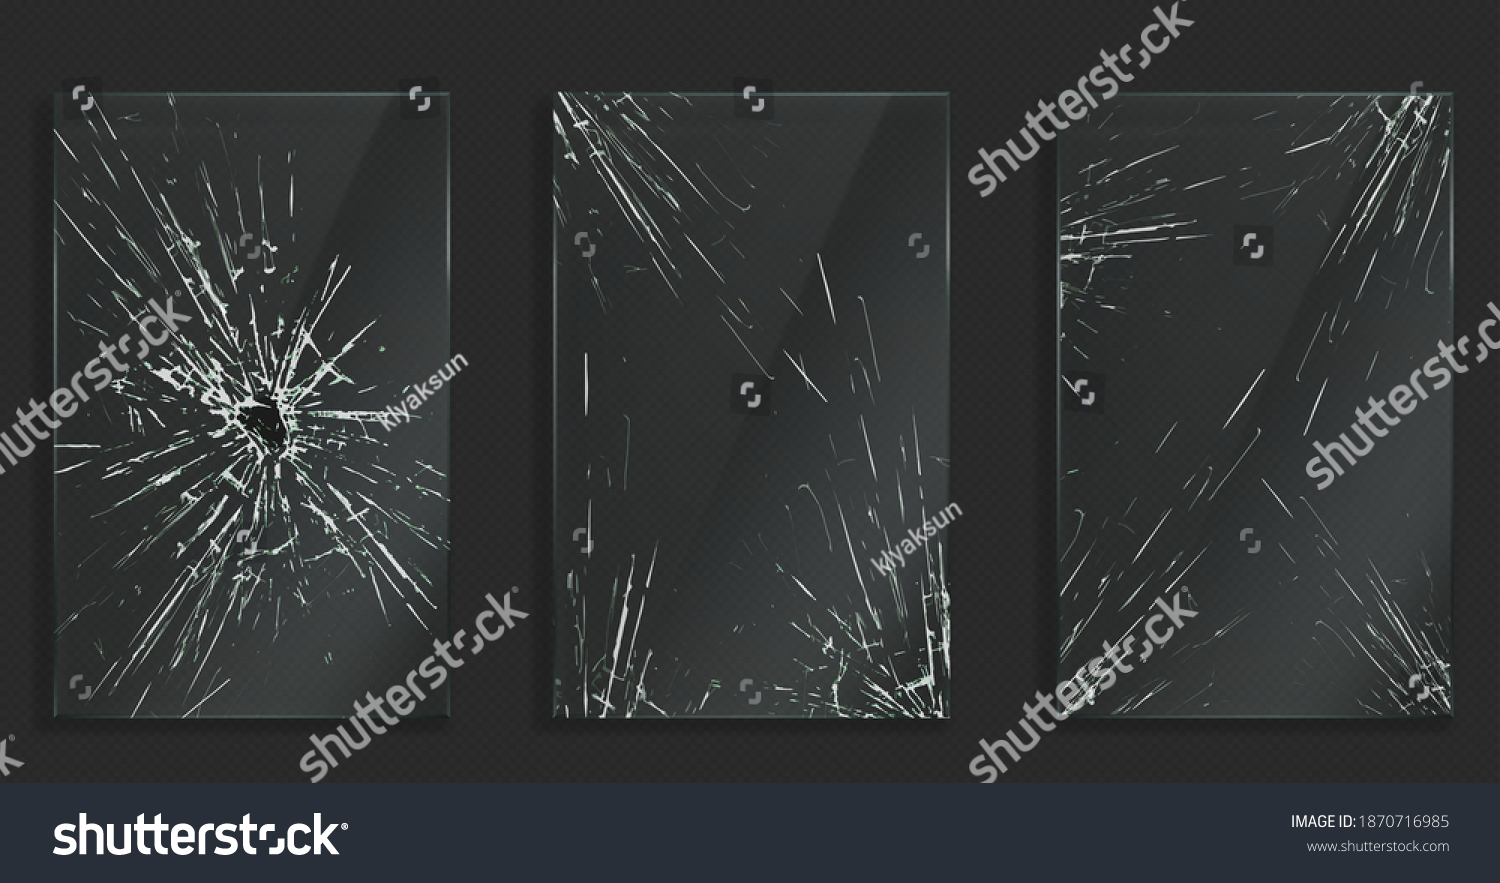 SVG of Broken glass with cracks and hole from impact or bullet. Vector realistic set of rectangle clear acrylic or plexiglass frames with crashed texture, white scratches and breaks svg